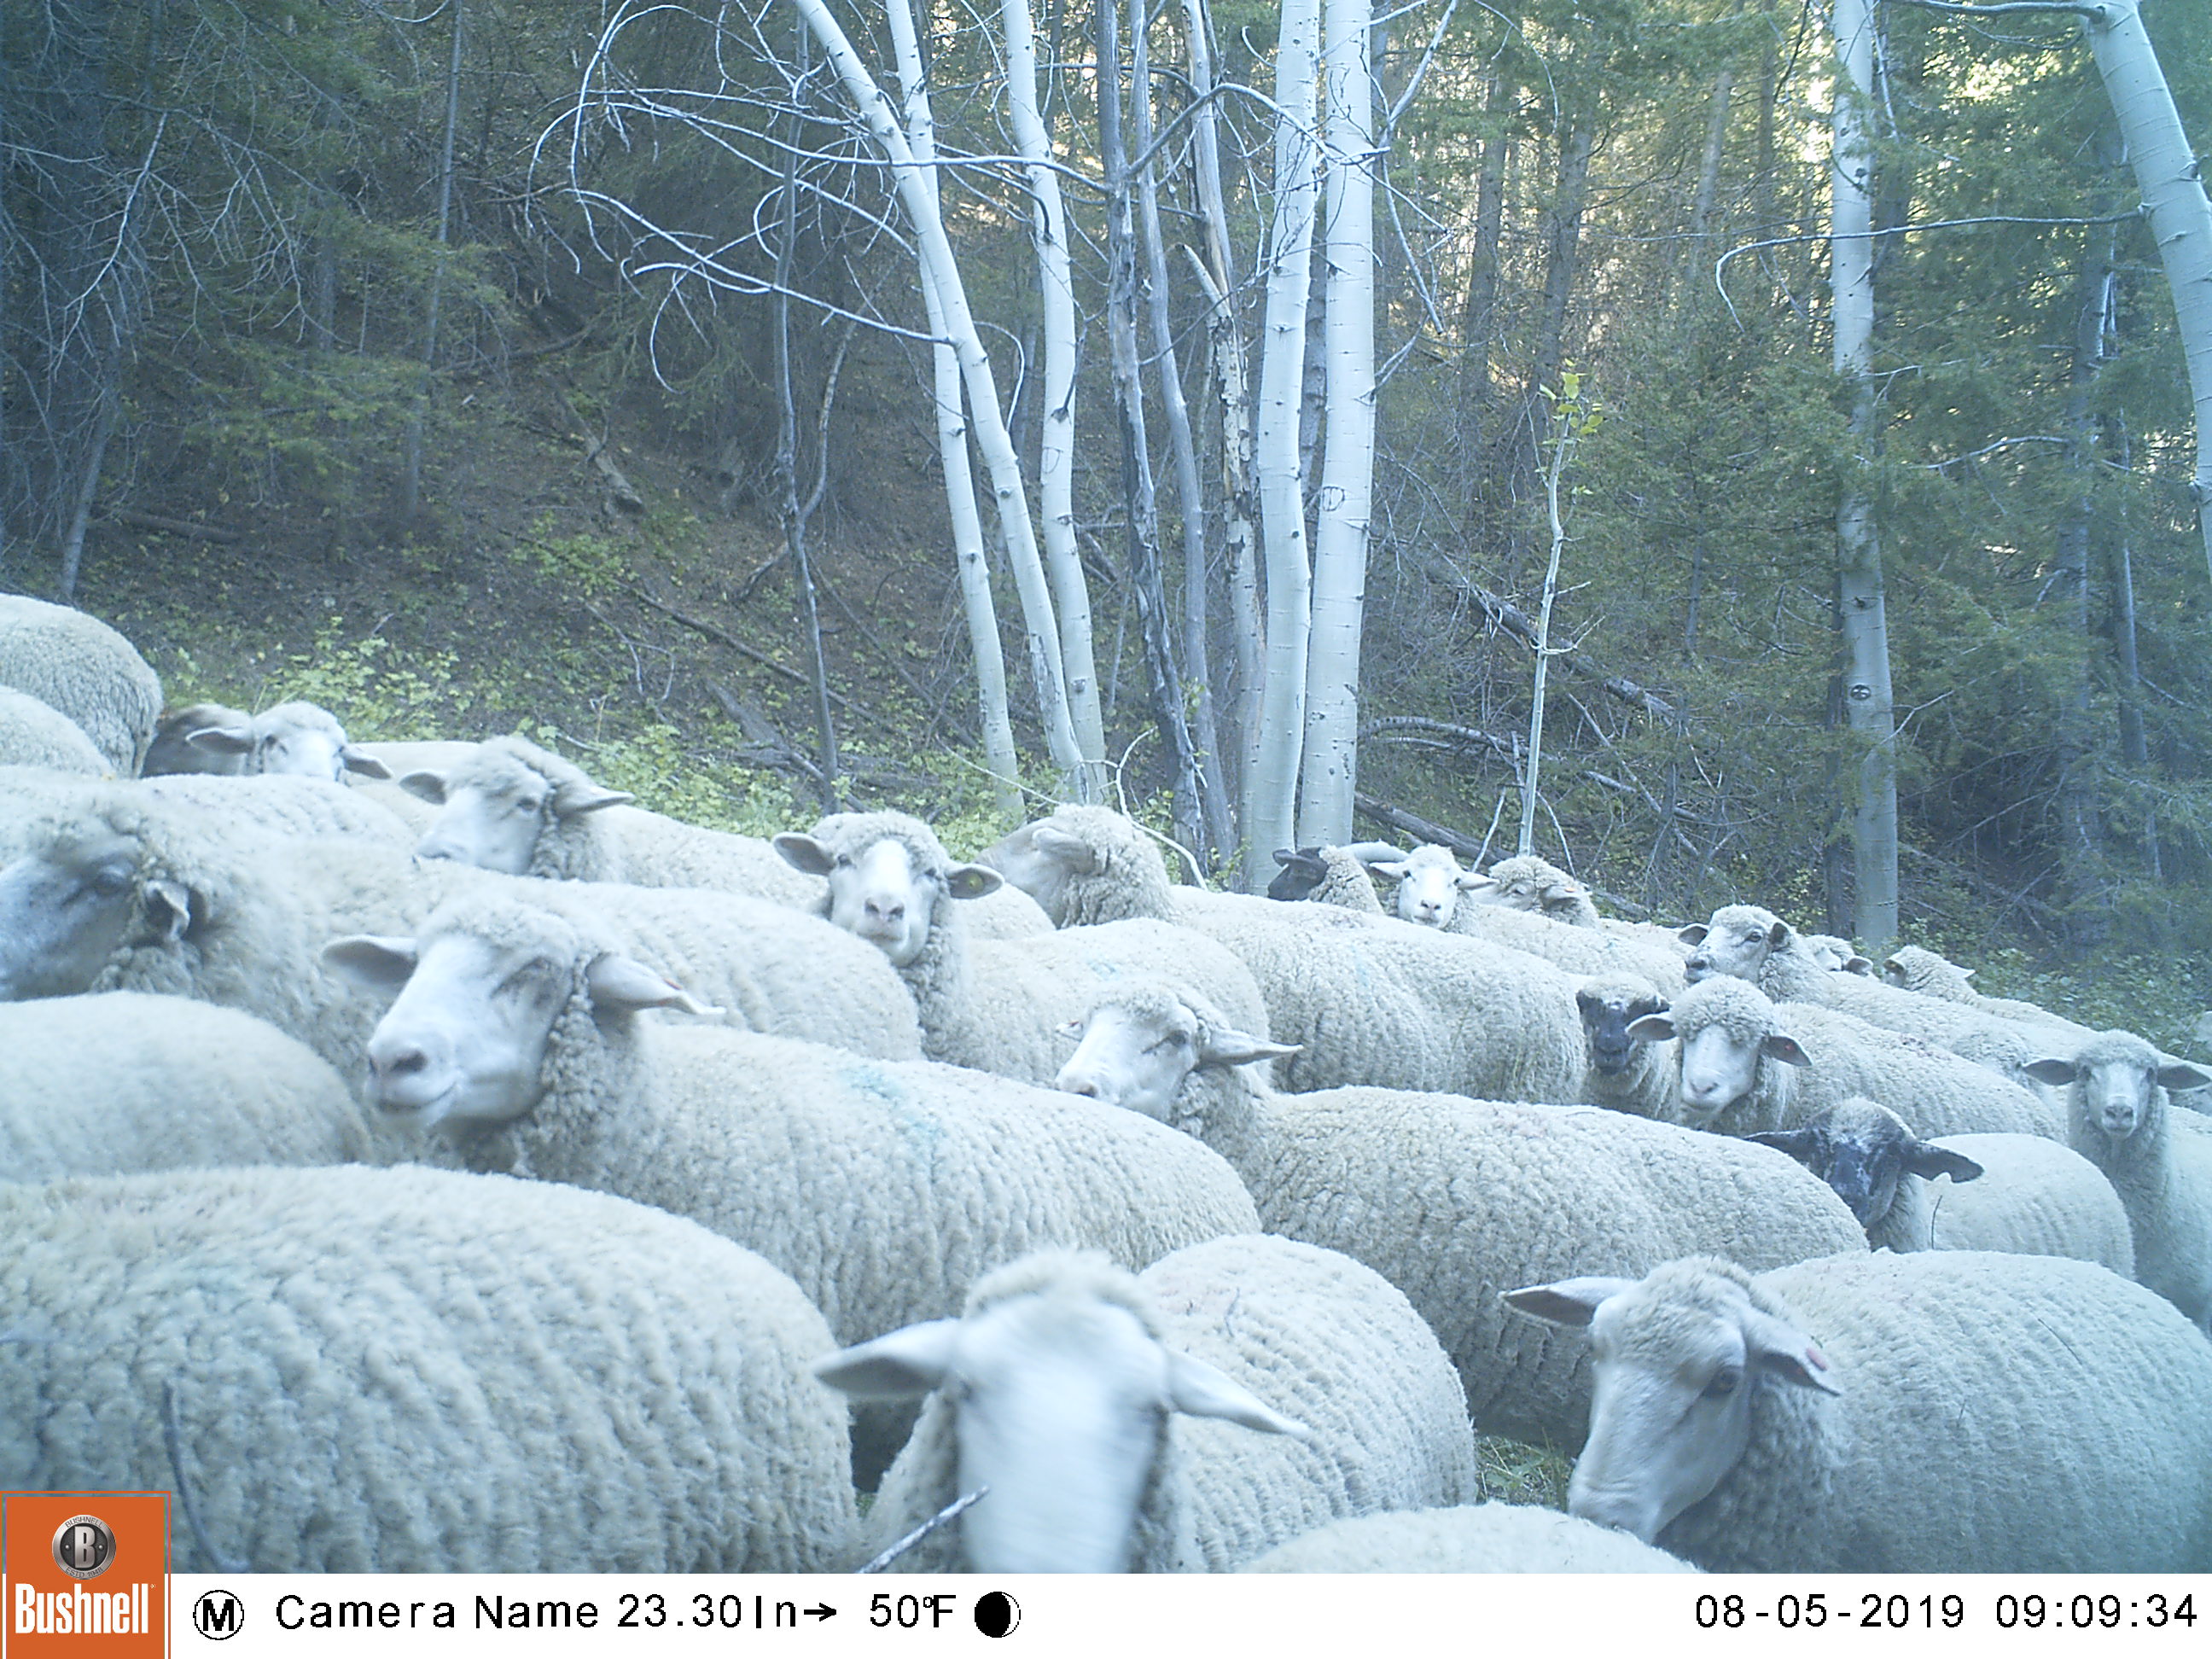 Select to view full image of sheep